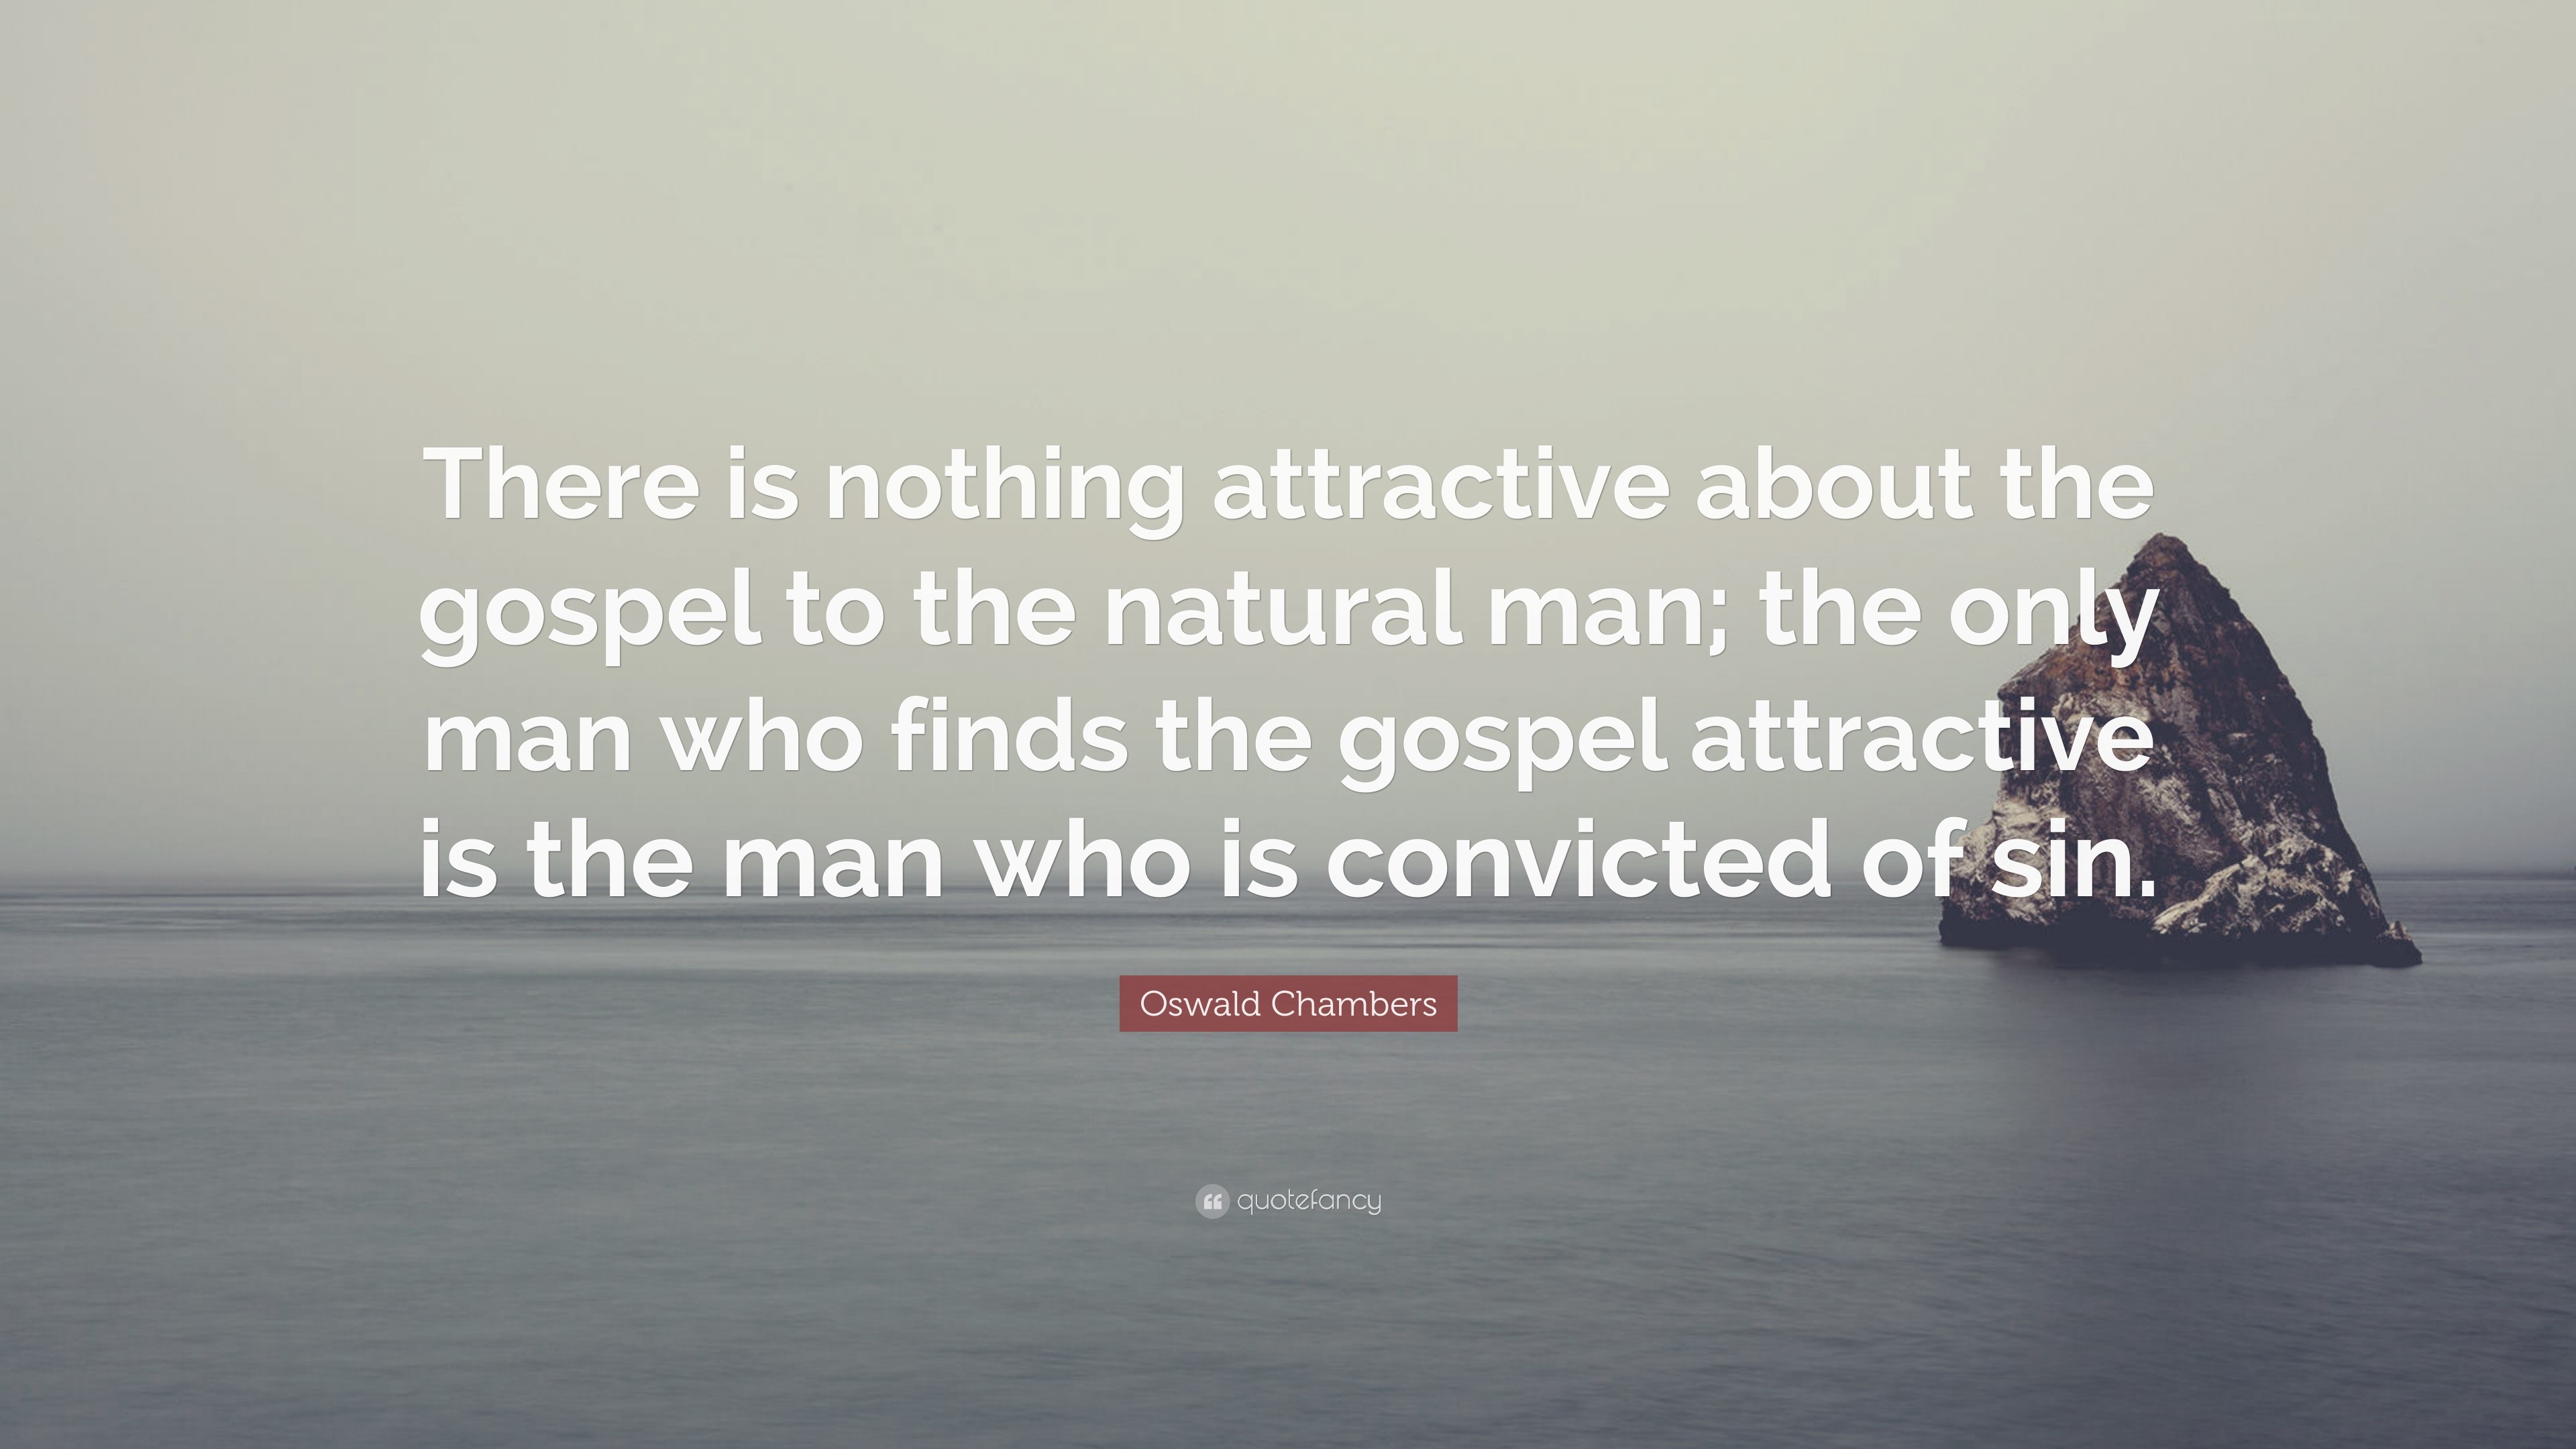 Oswald Chambers Quote: “There is nothing attractive about the gospel to ...